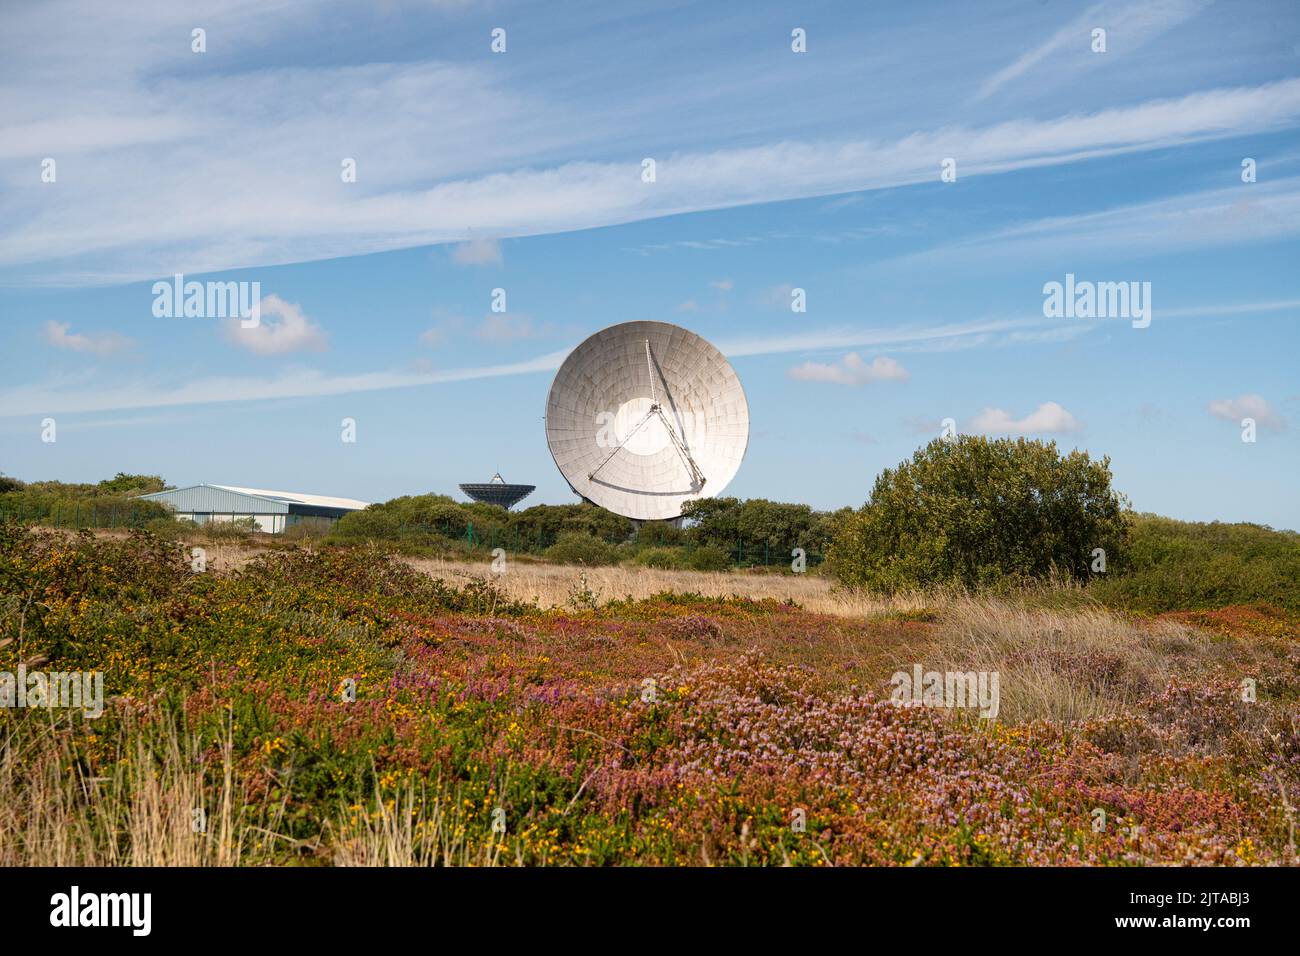 Cornwall,plays a part in Artemis 1 launch, Goonhilly Earth Station Stock Photo